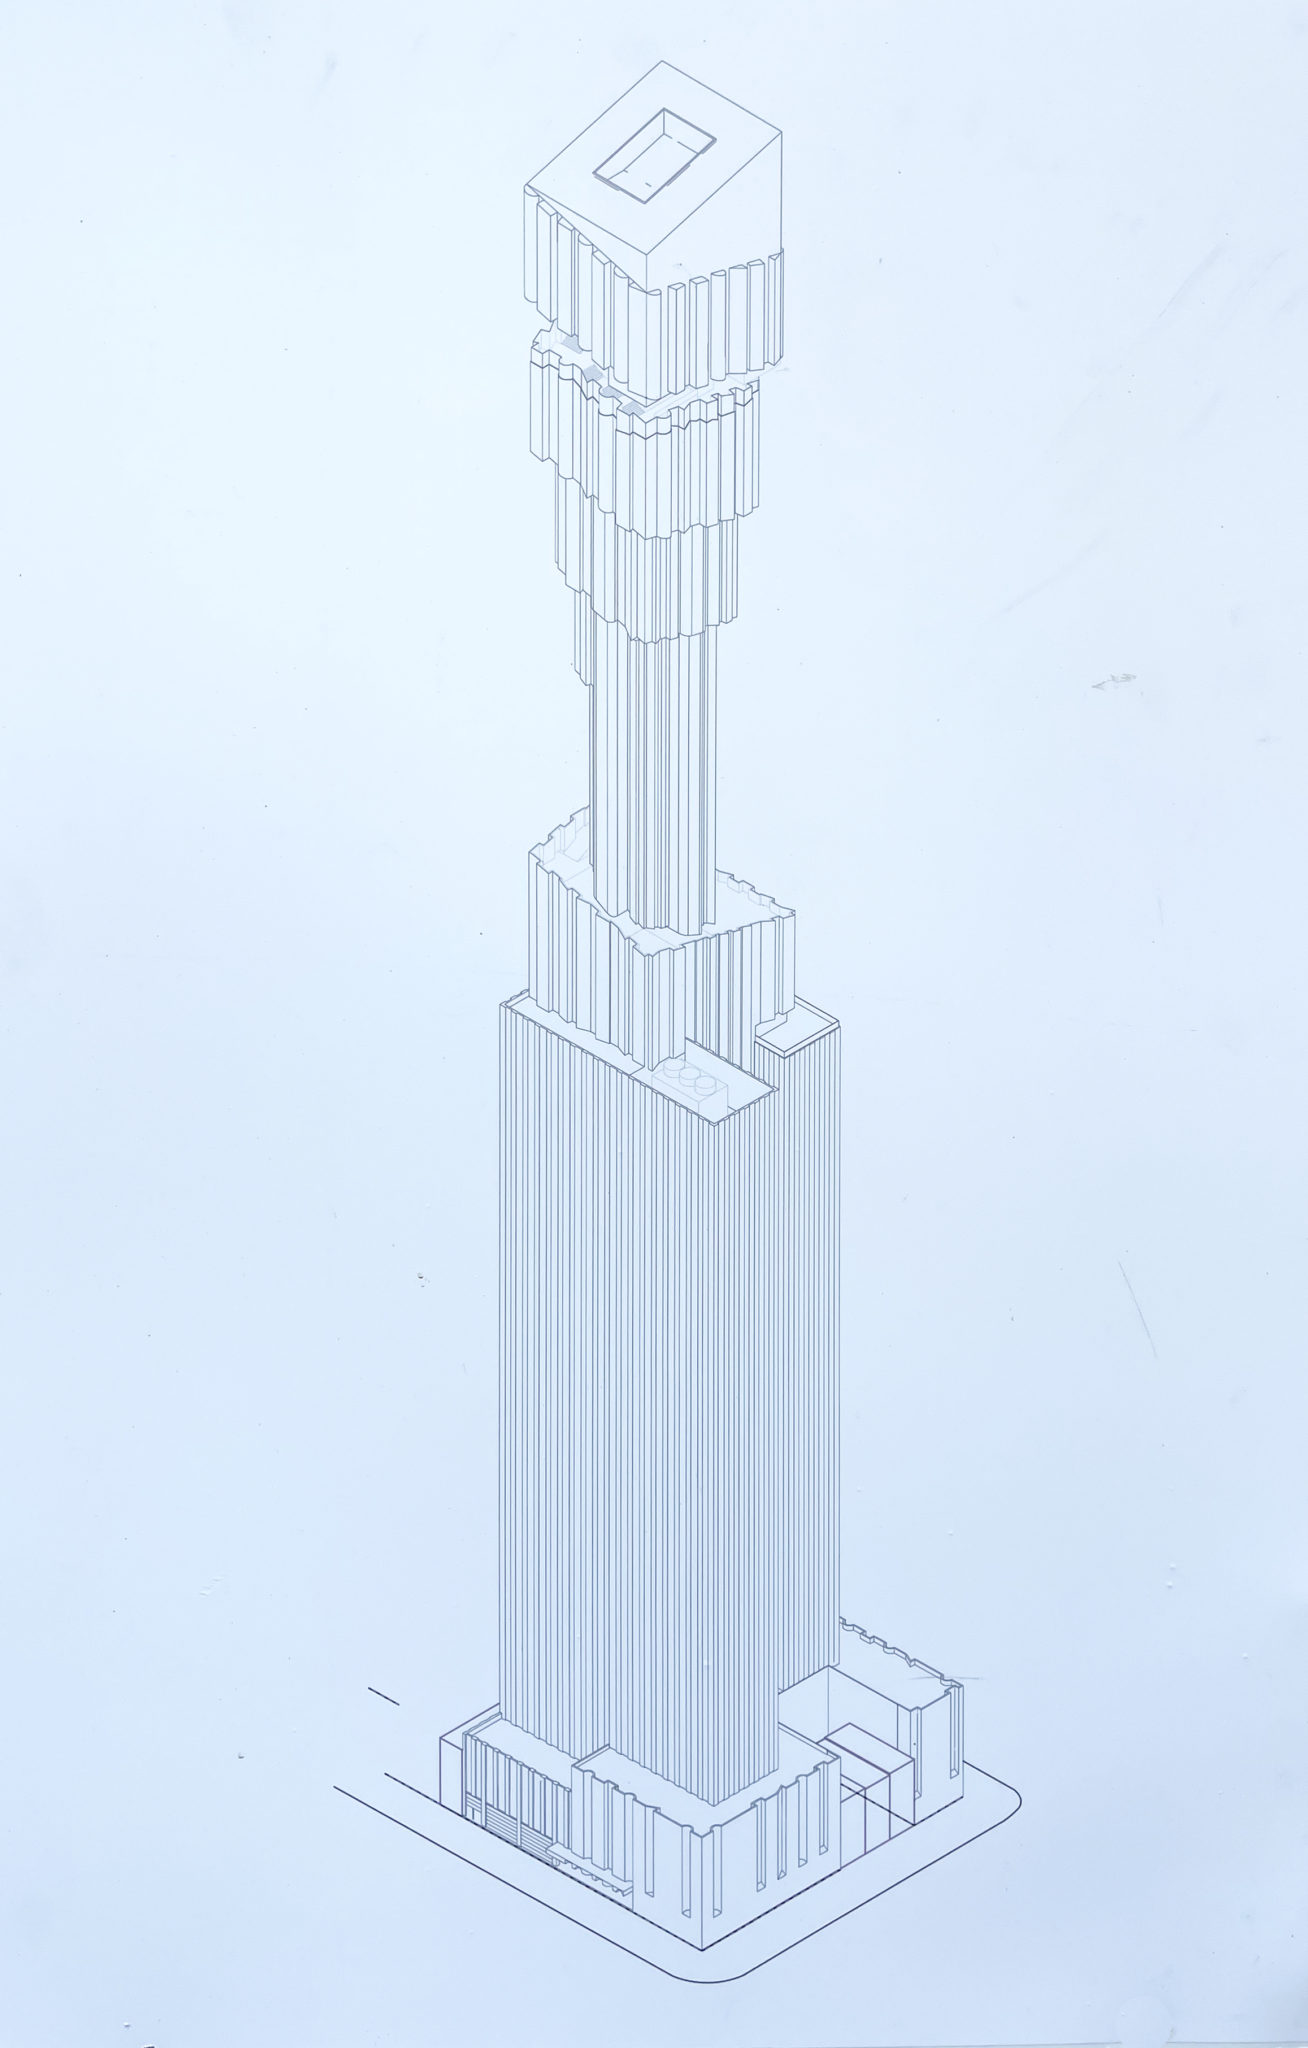 52 story supertall skyscraper being built on 46th and 8th